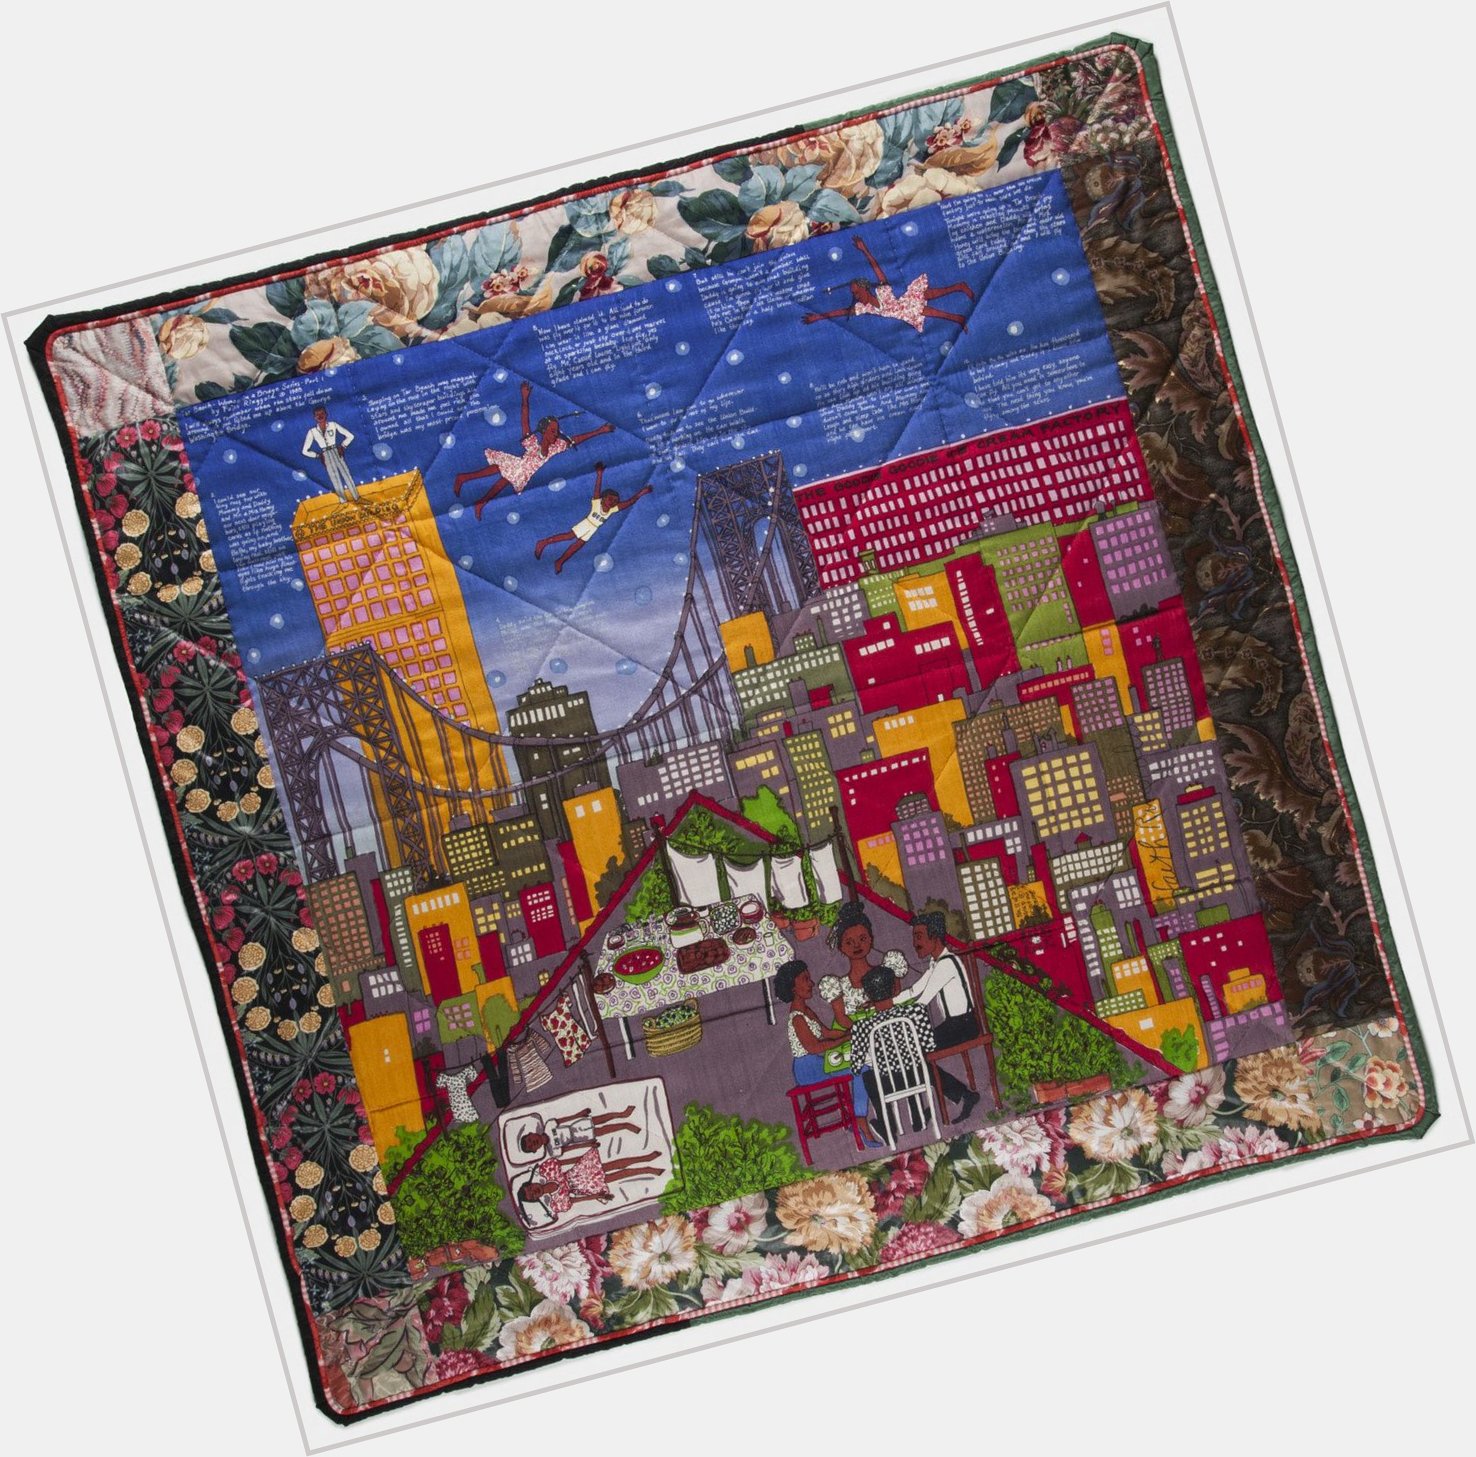 Philamuseum: Happy birthday to Faith Ringgold. Best known for...  